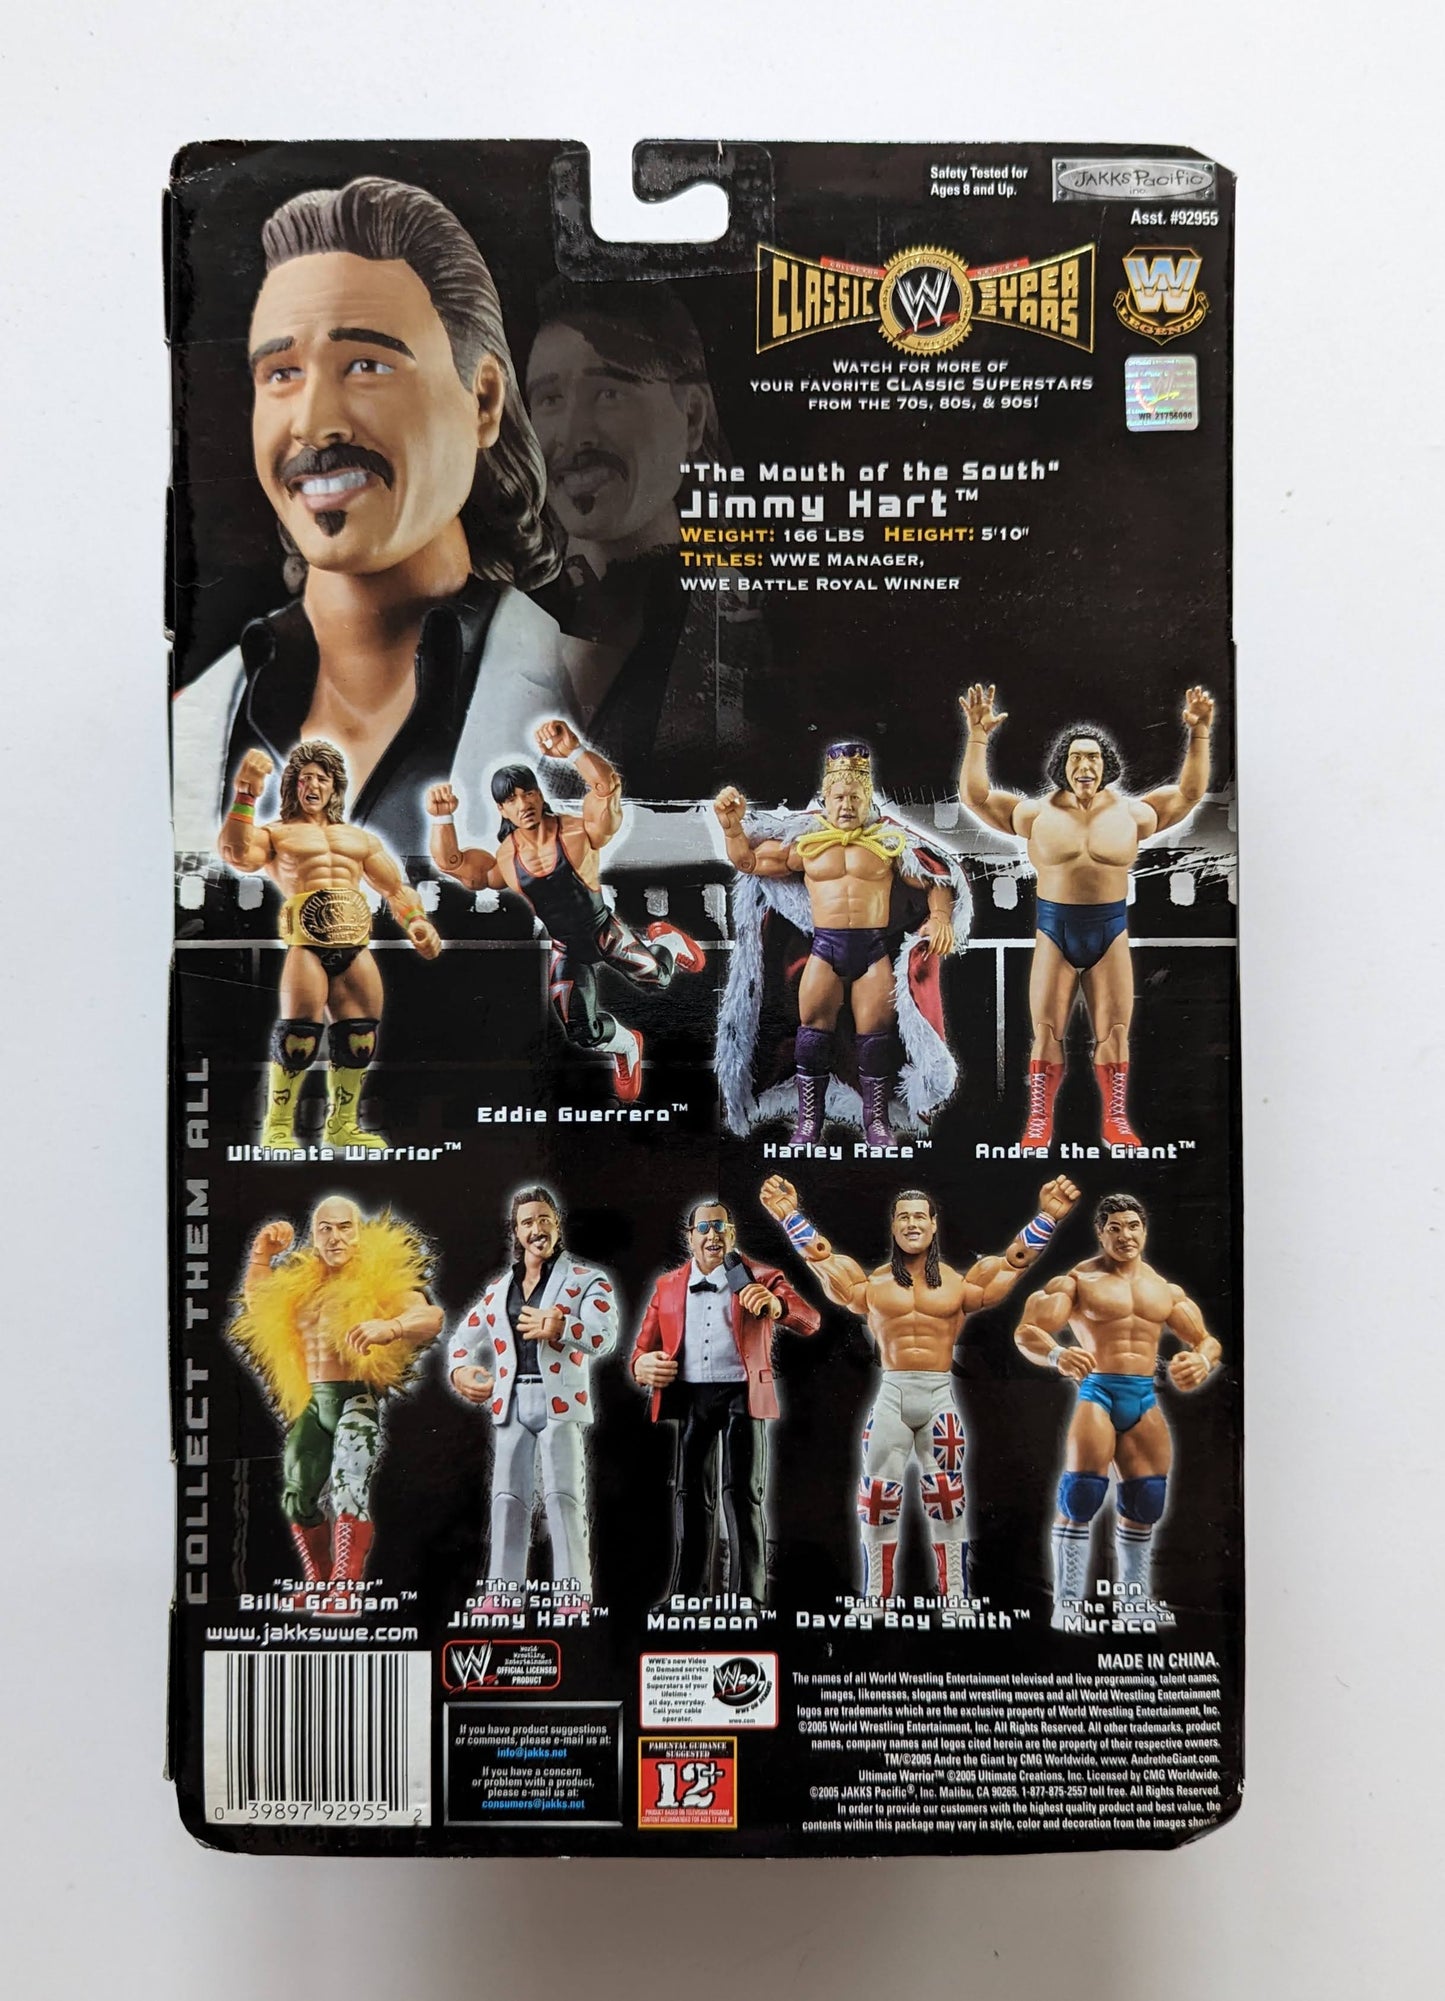 2005 WWE Jakks Pacific Classic Superstars Series 7 "The Mouth of the South" Jimmy Hart